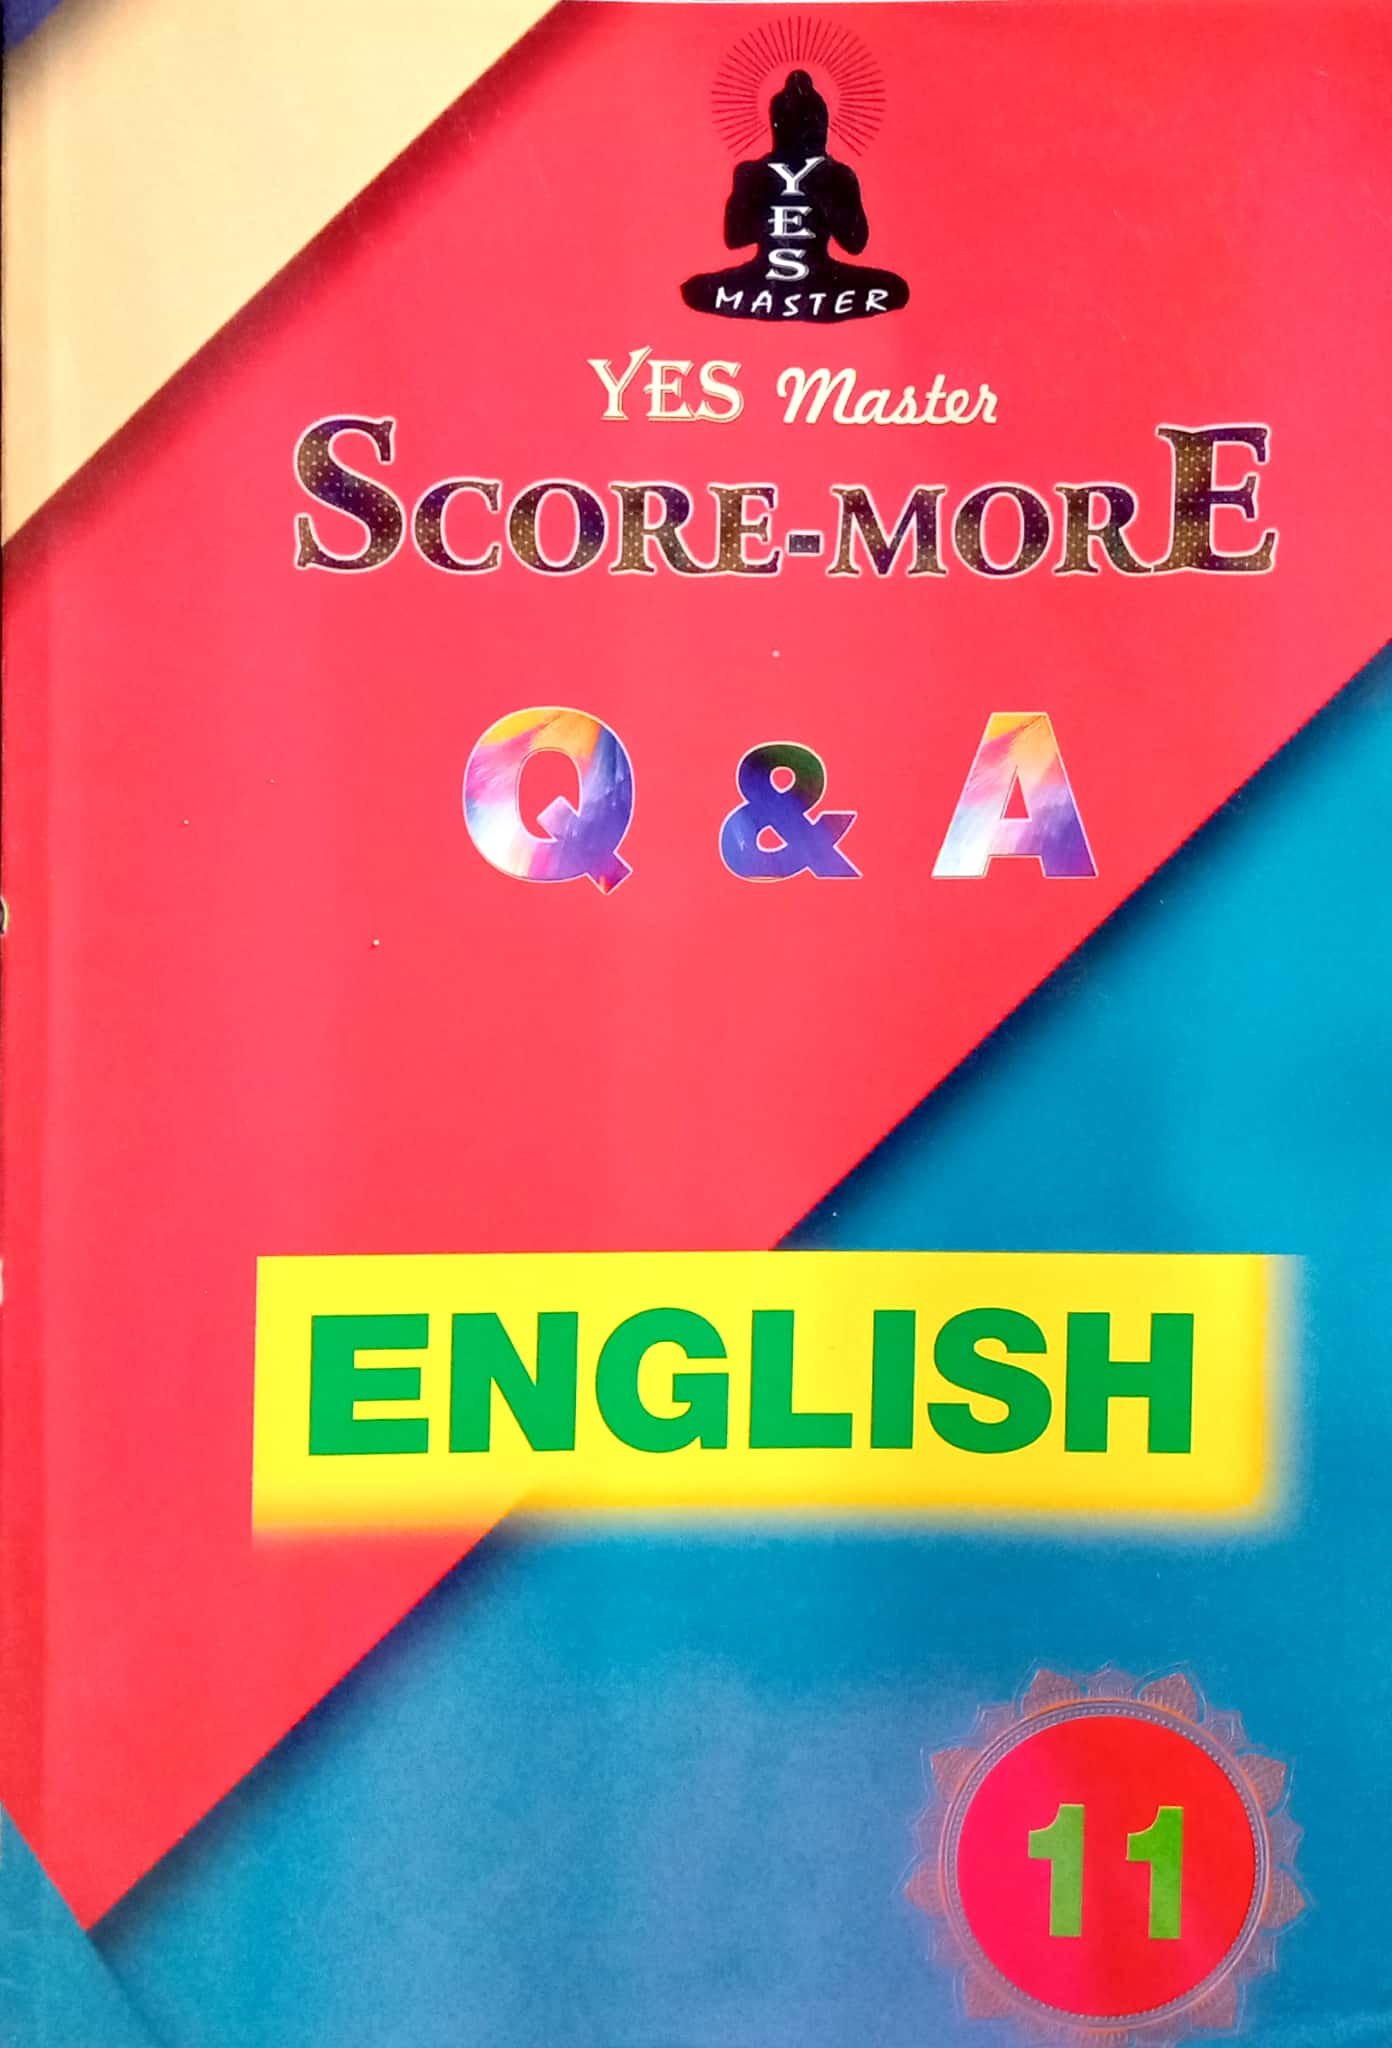 Routemybook Buy 11th Standard Yes Master [ScoreMore] Q&A English Guide by Premier's Editorial